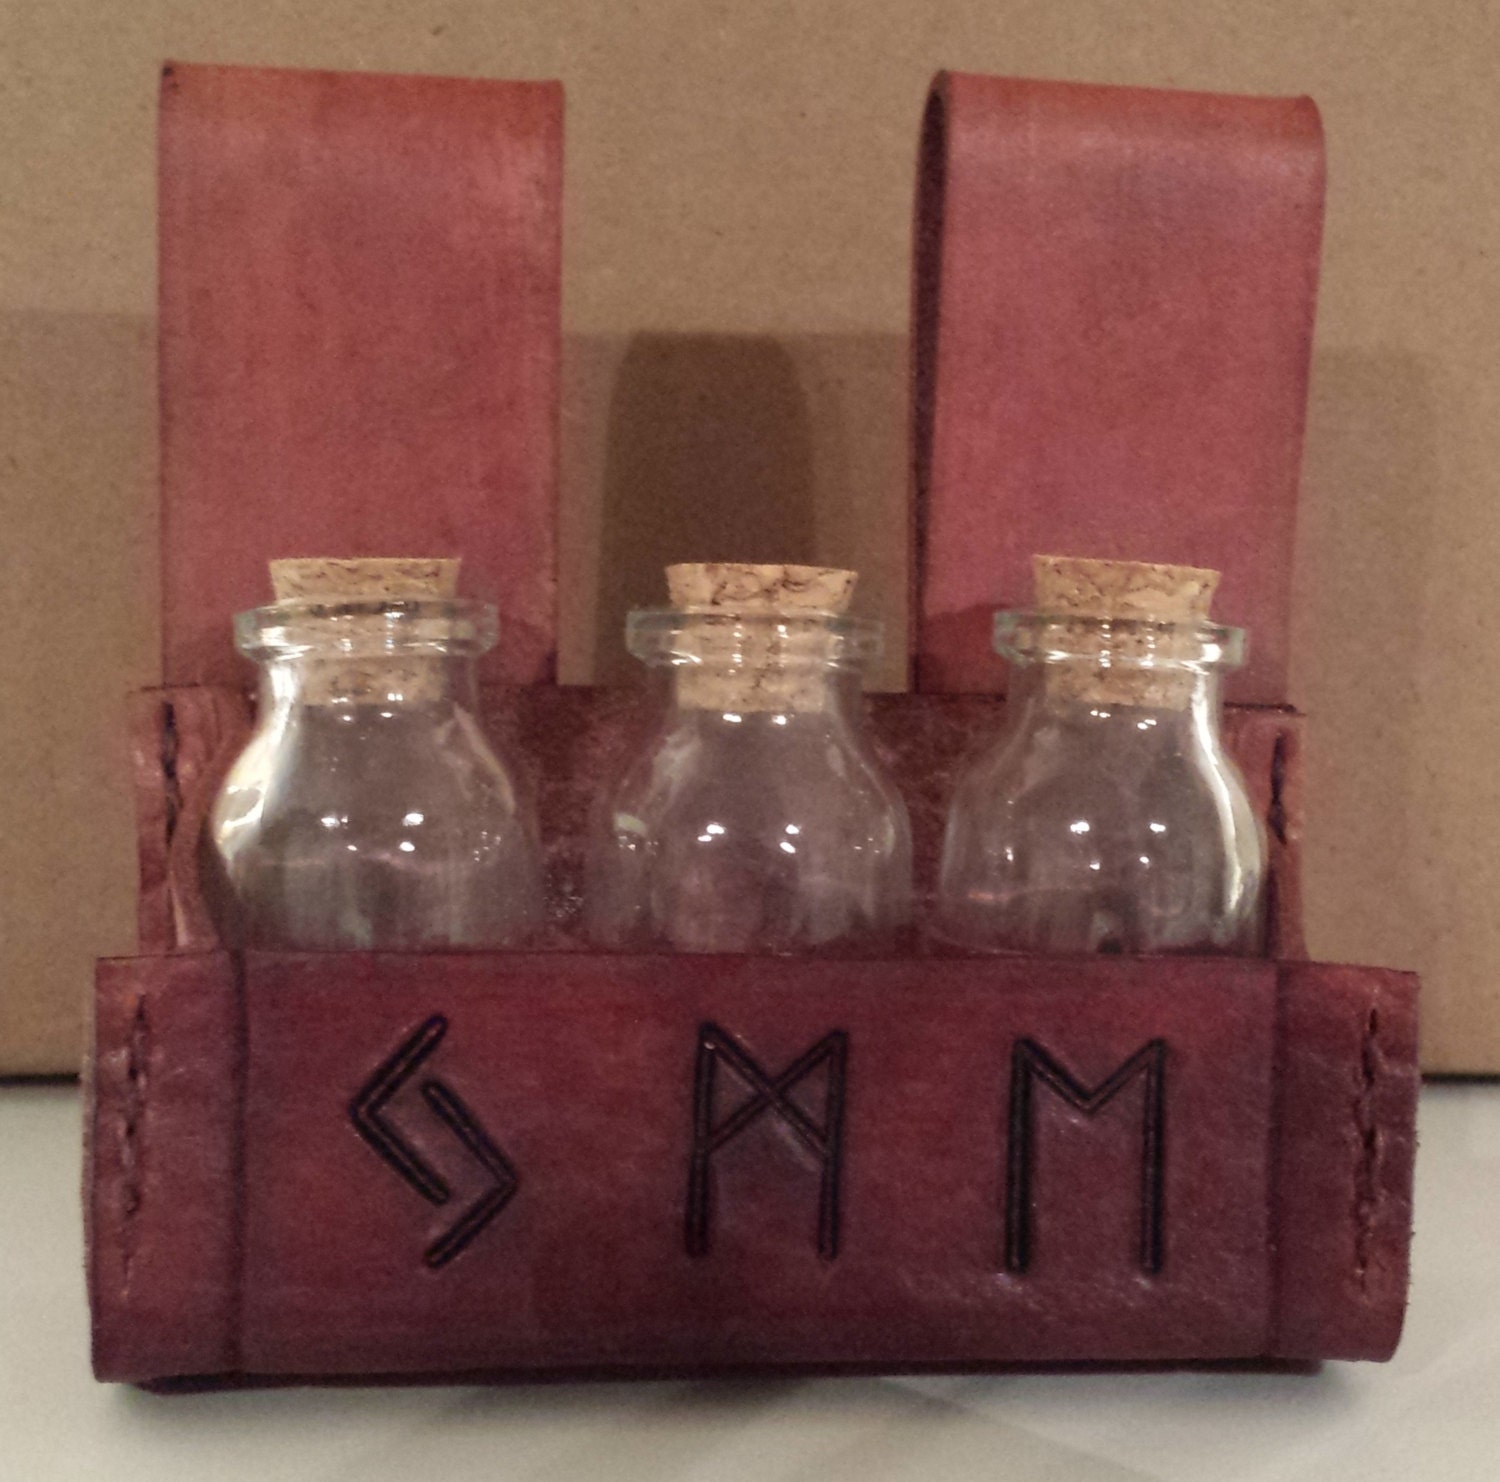 Potion bottle holster Witcher potions vial 3 small corked jars in leather holster brown or black Accessoires Riemen & bretels Riemen hanging bottles from your belt 